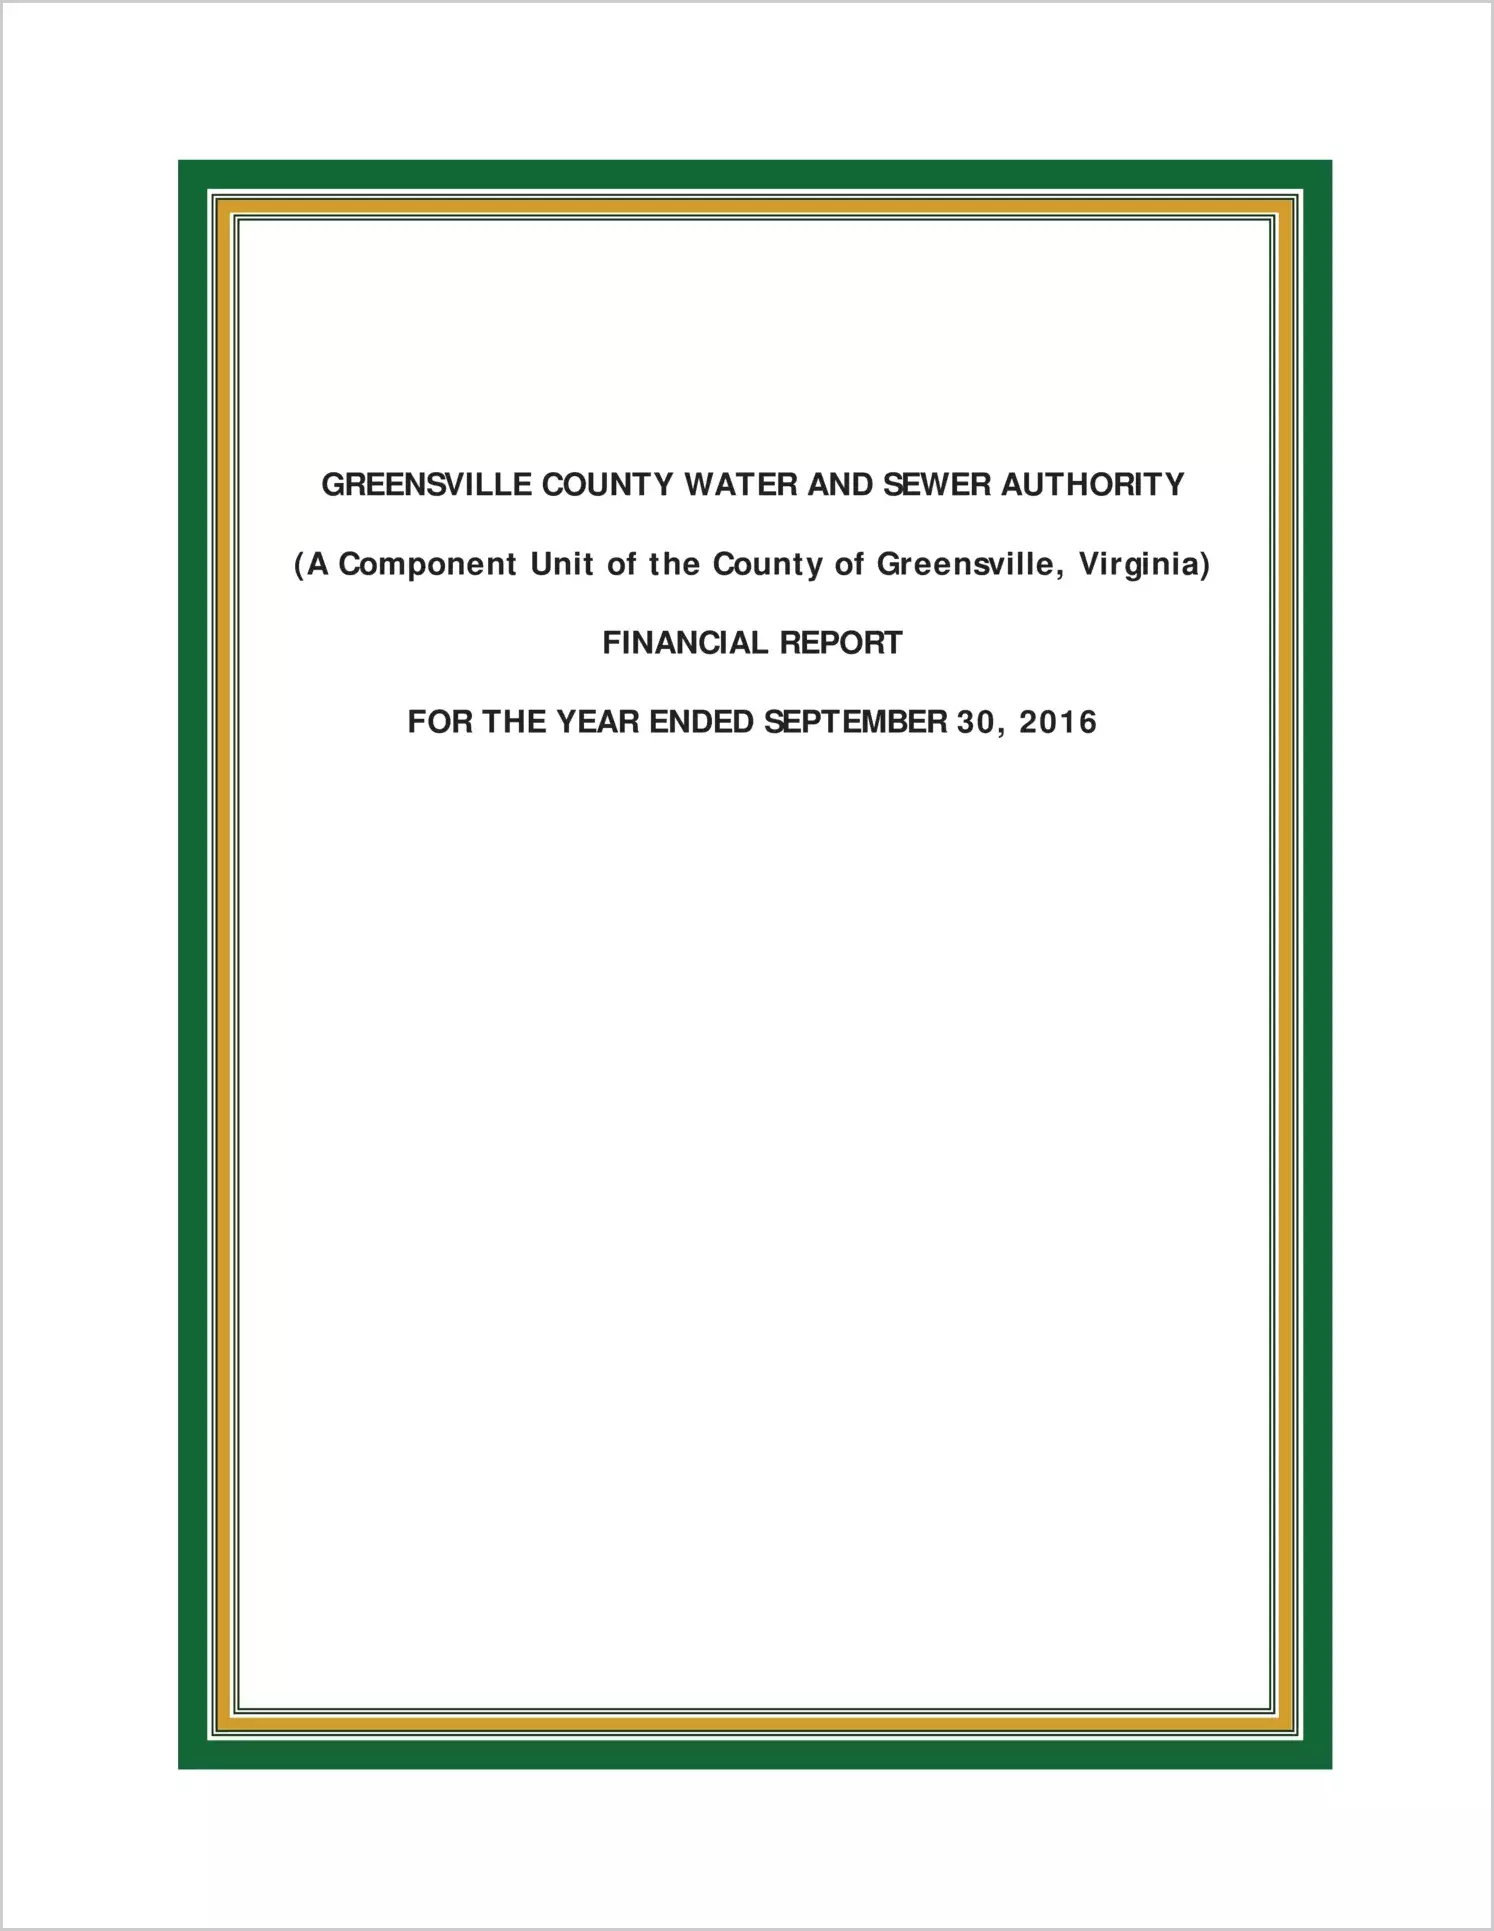 2016 ABC/Other Annual Financial Report  for Greensville County Water and Sewer Authority